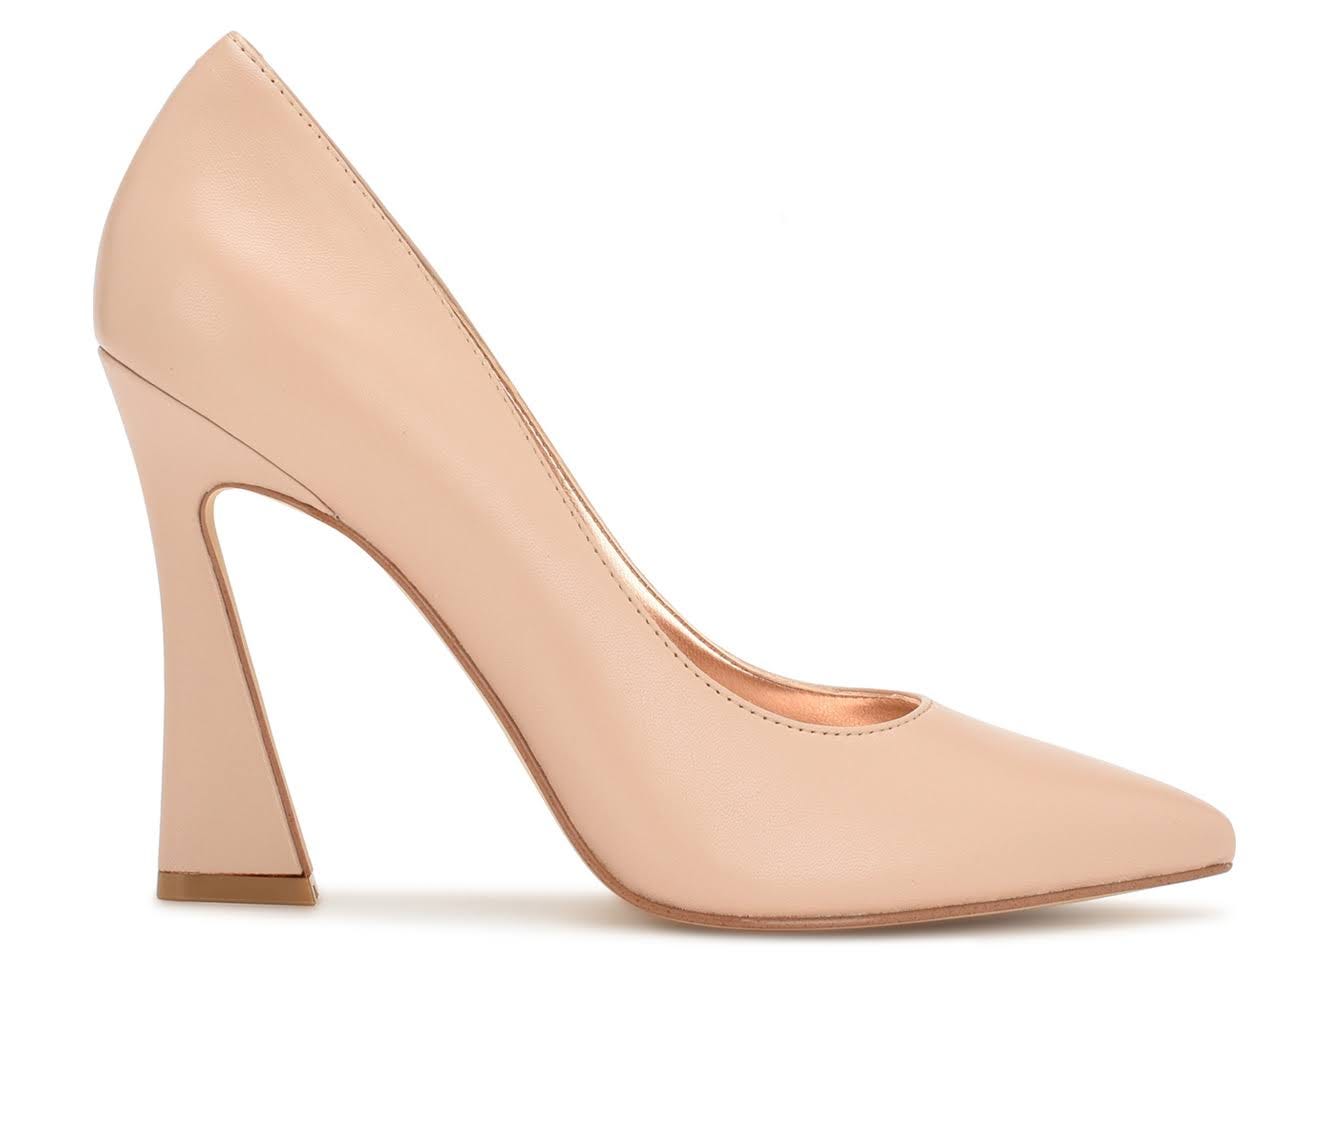 Elegant Cream Heels for Dress, Work, and Casual Wear | Image